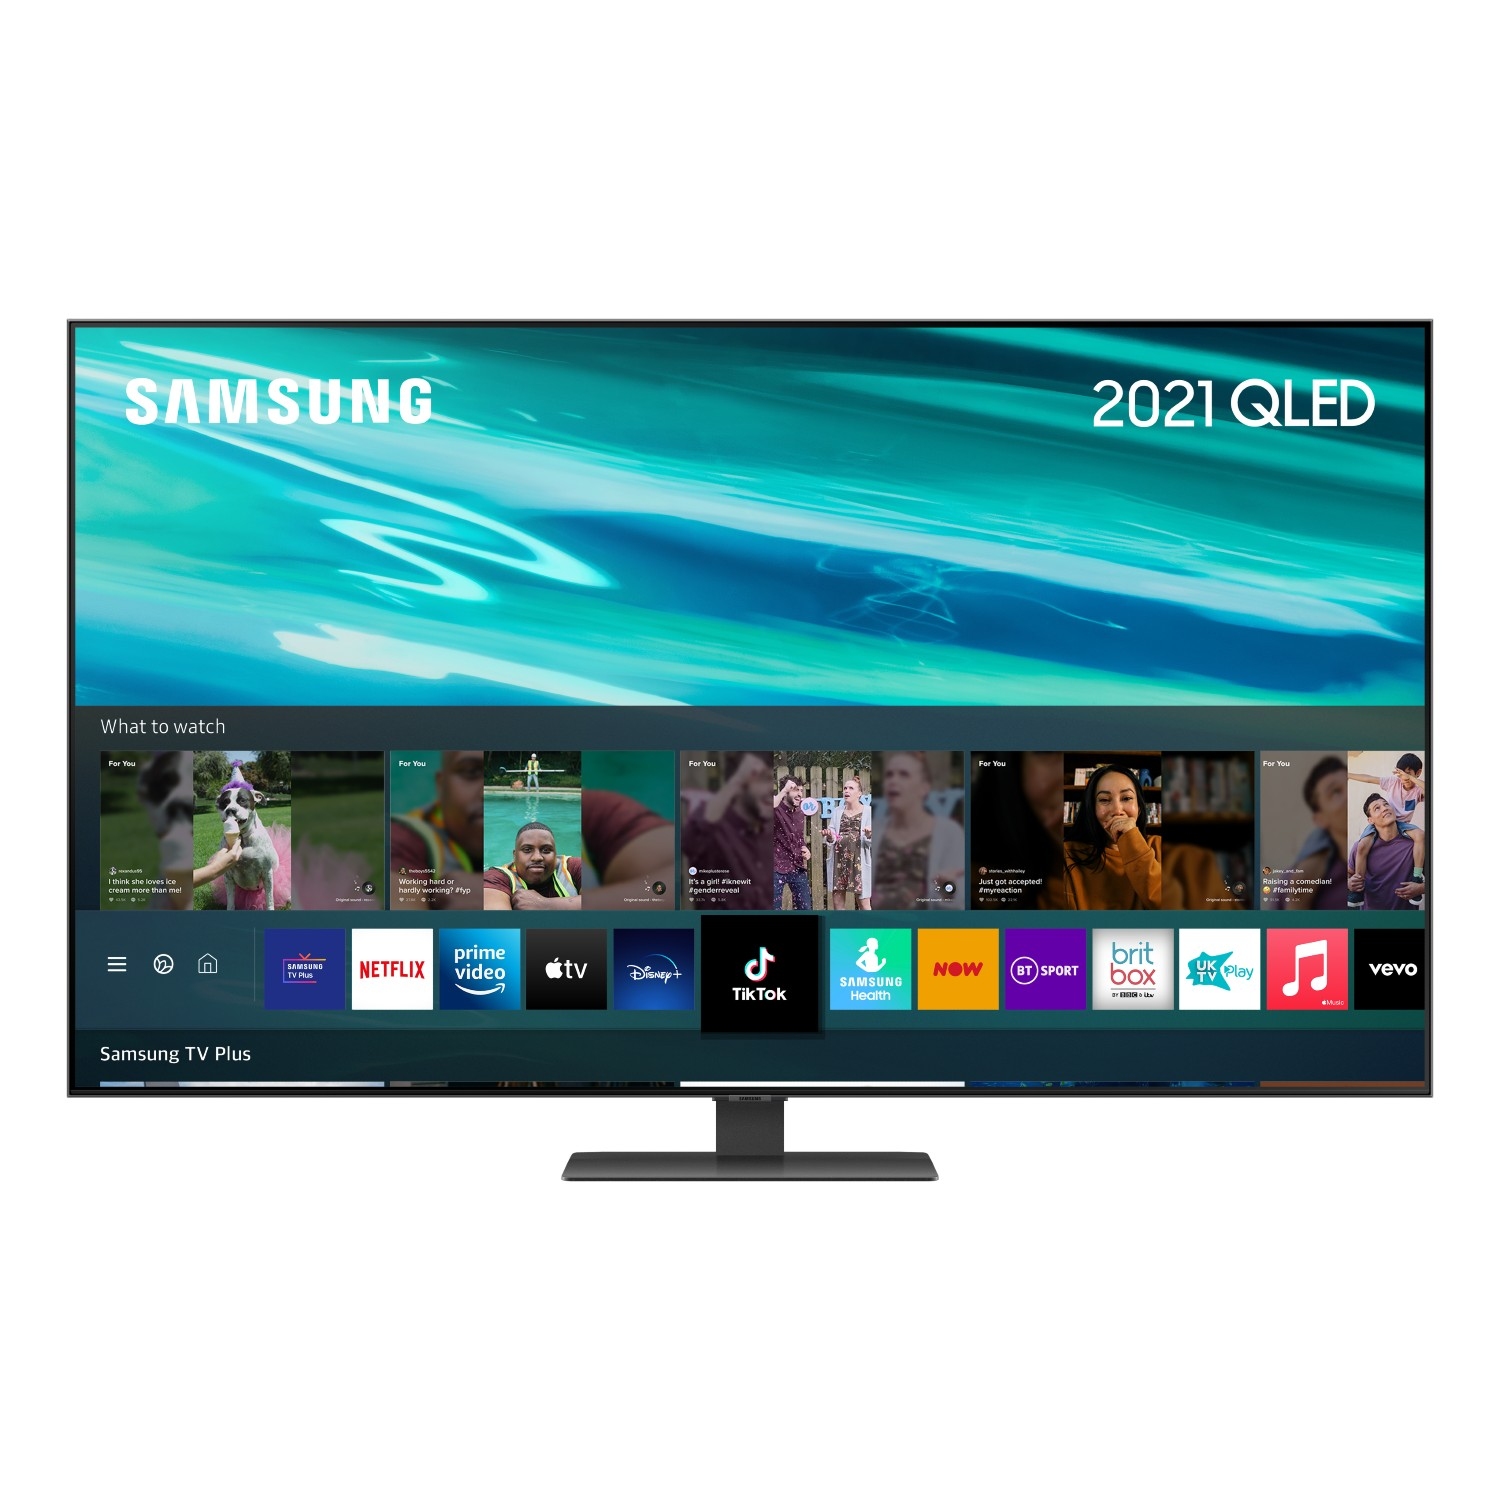 Samsung QE75Q80AATXXU 75" 4K QLED Smart TV Quantum HDR 1500 powered by HDR10+ with Object Tracking Sound and Direct Full Array - 0